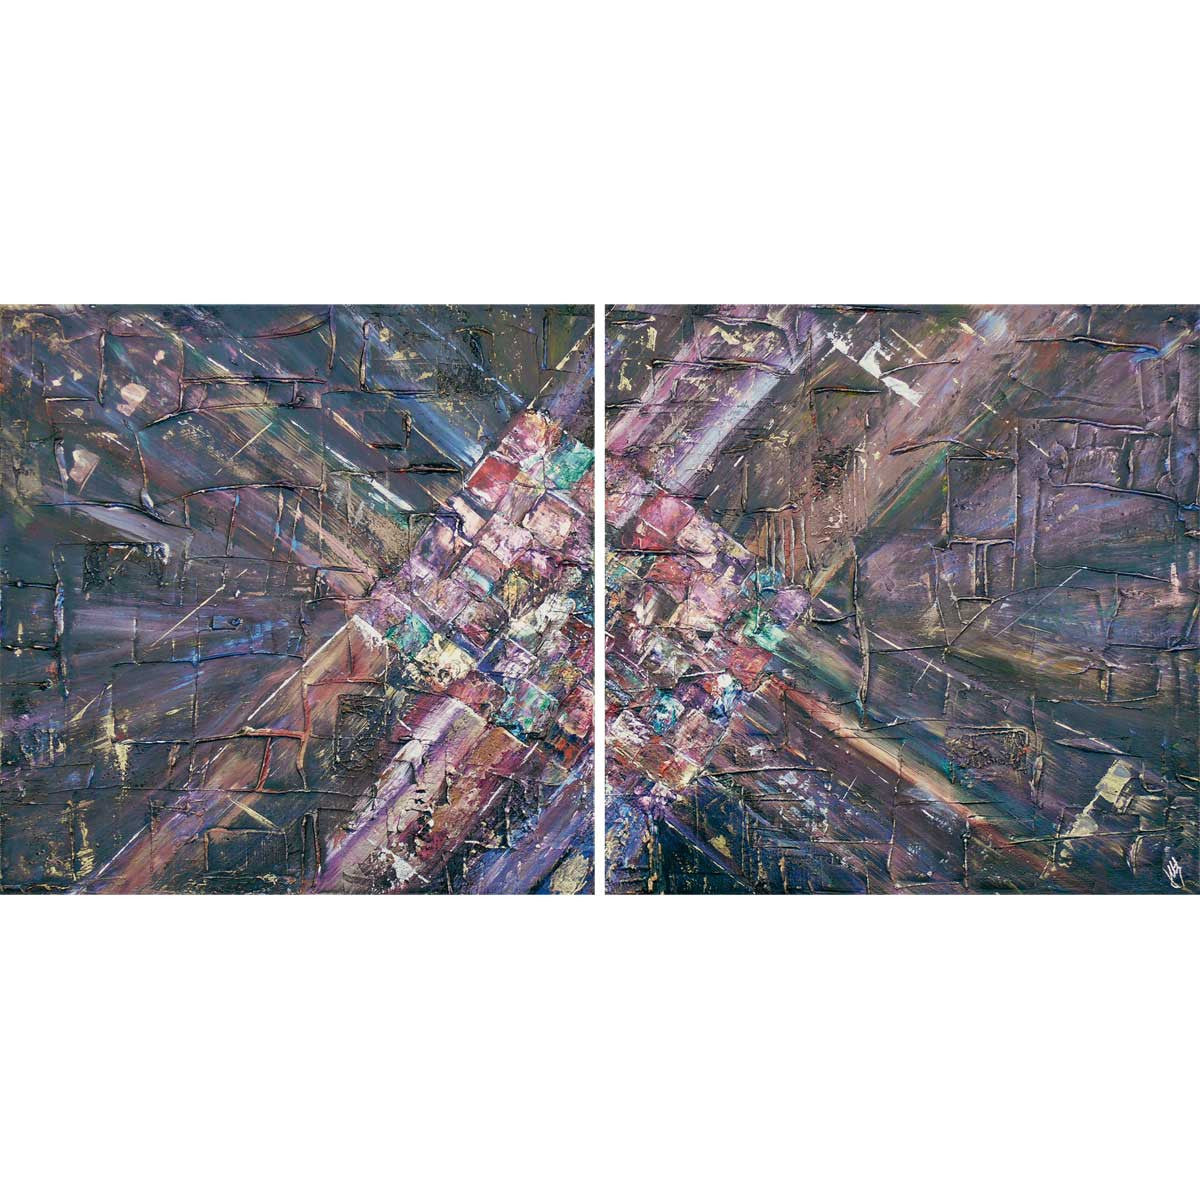 'The Gift' original diptych painting on canvas